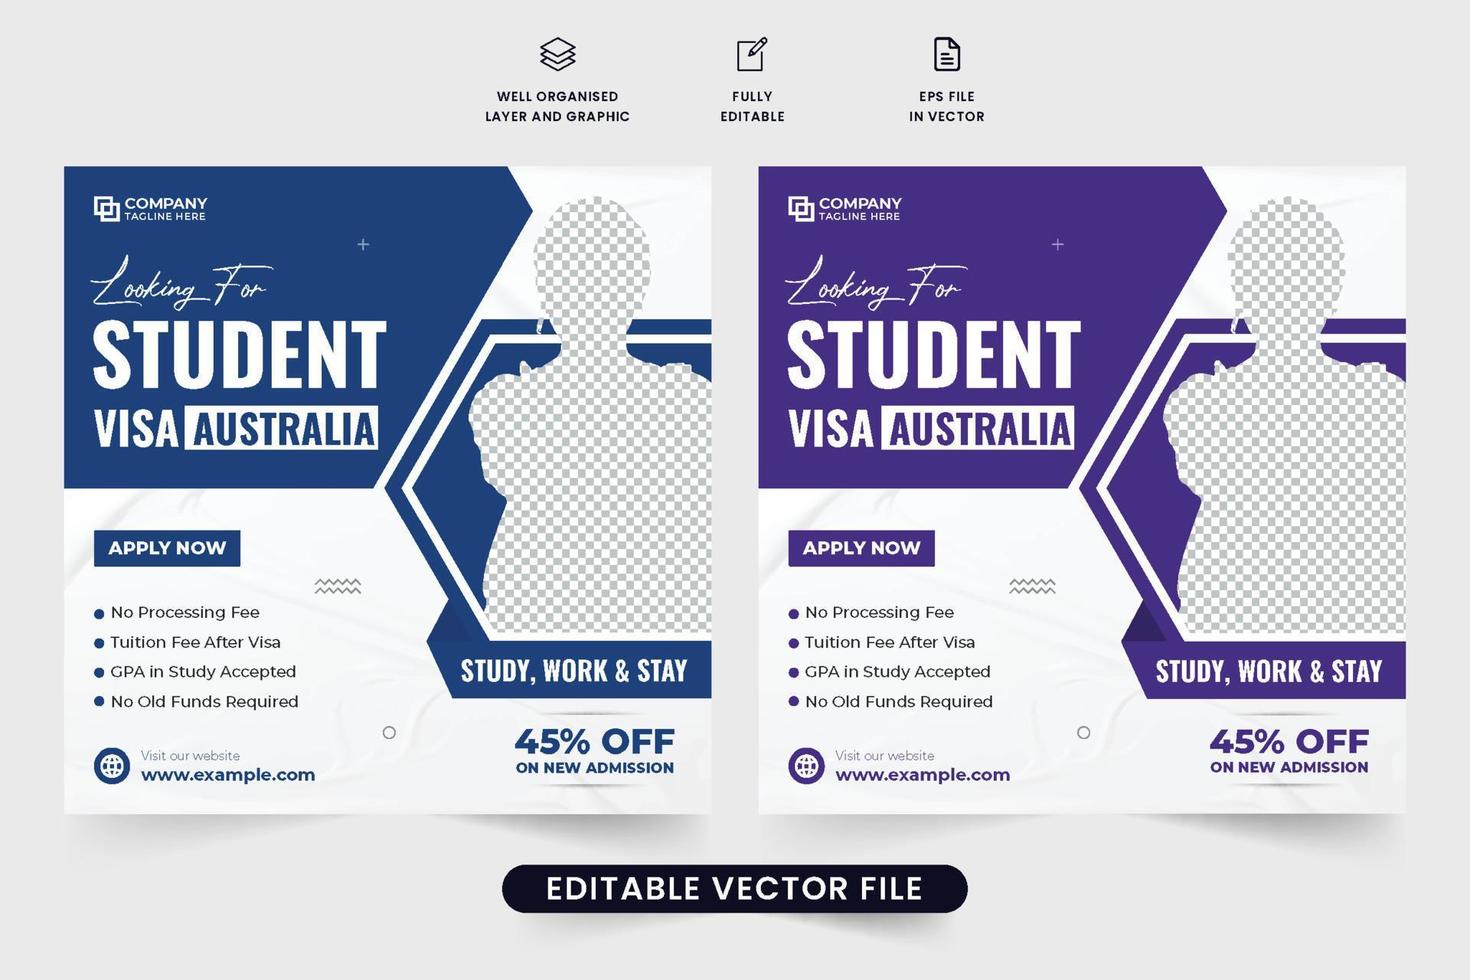 Student application and study abroad promotional template design for social media marketing. Modern abroad education facilities poster design with photo placeholders. Abroad study agency web banner. vector